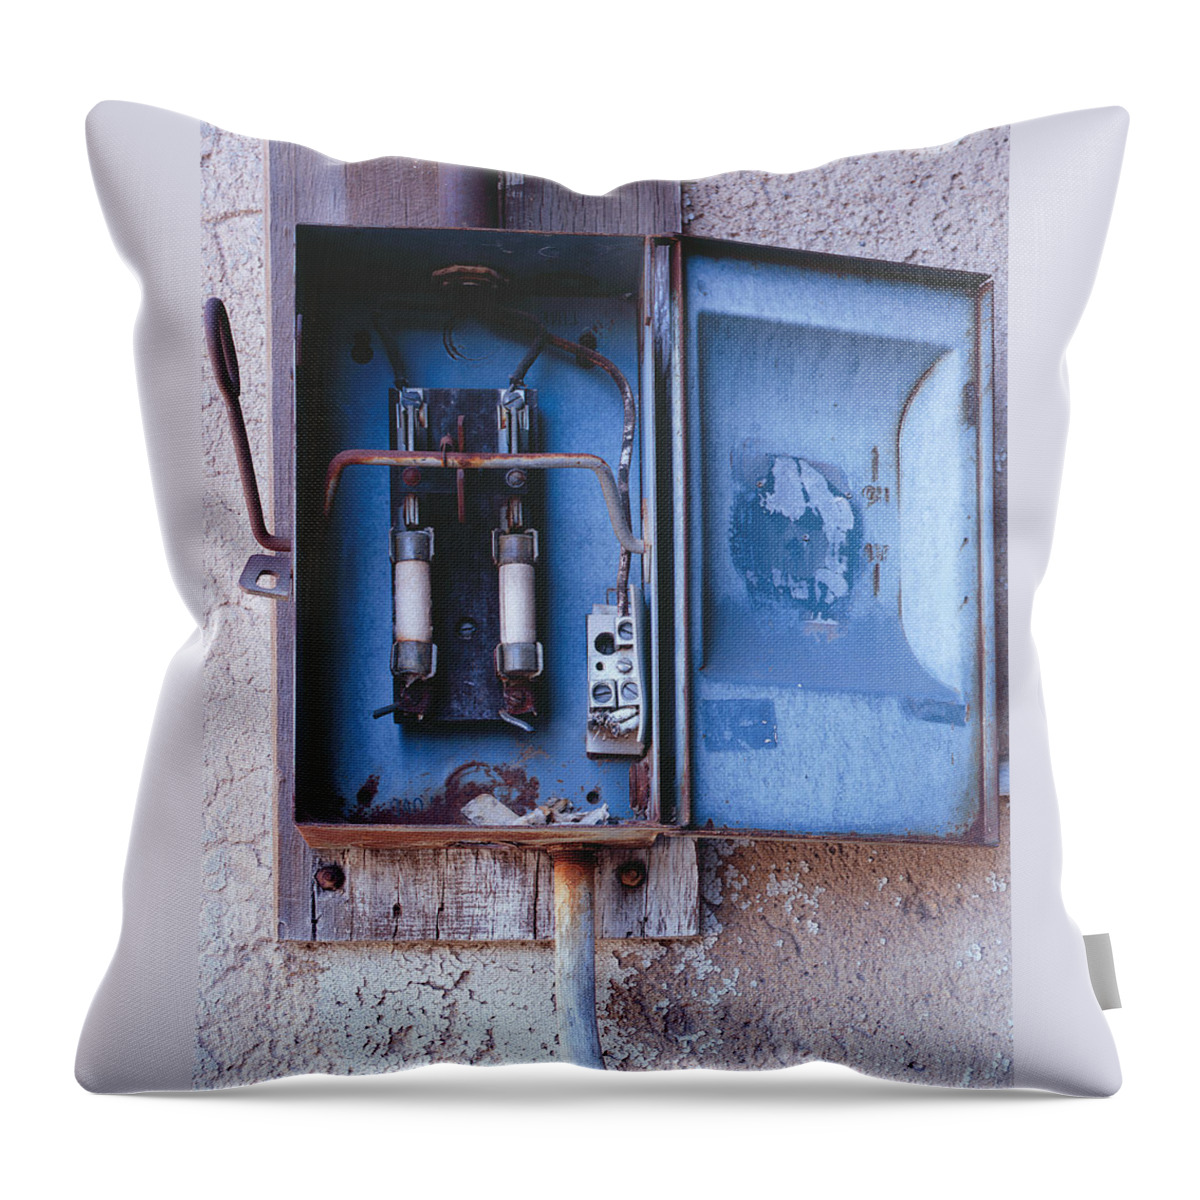 United States Throw Pillow featuring the photograph Electrical Box by Richard Gehlbach